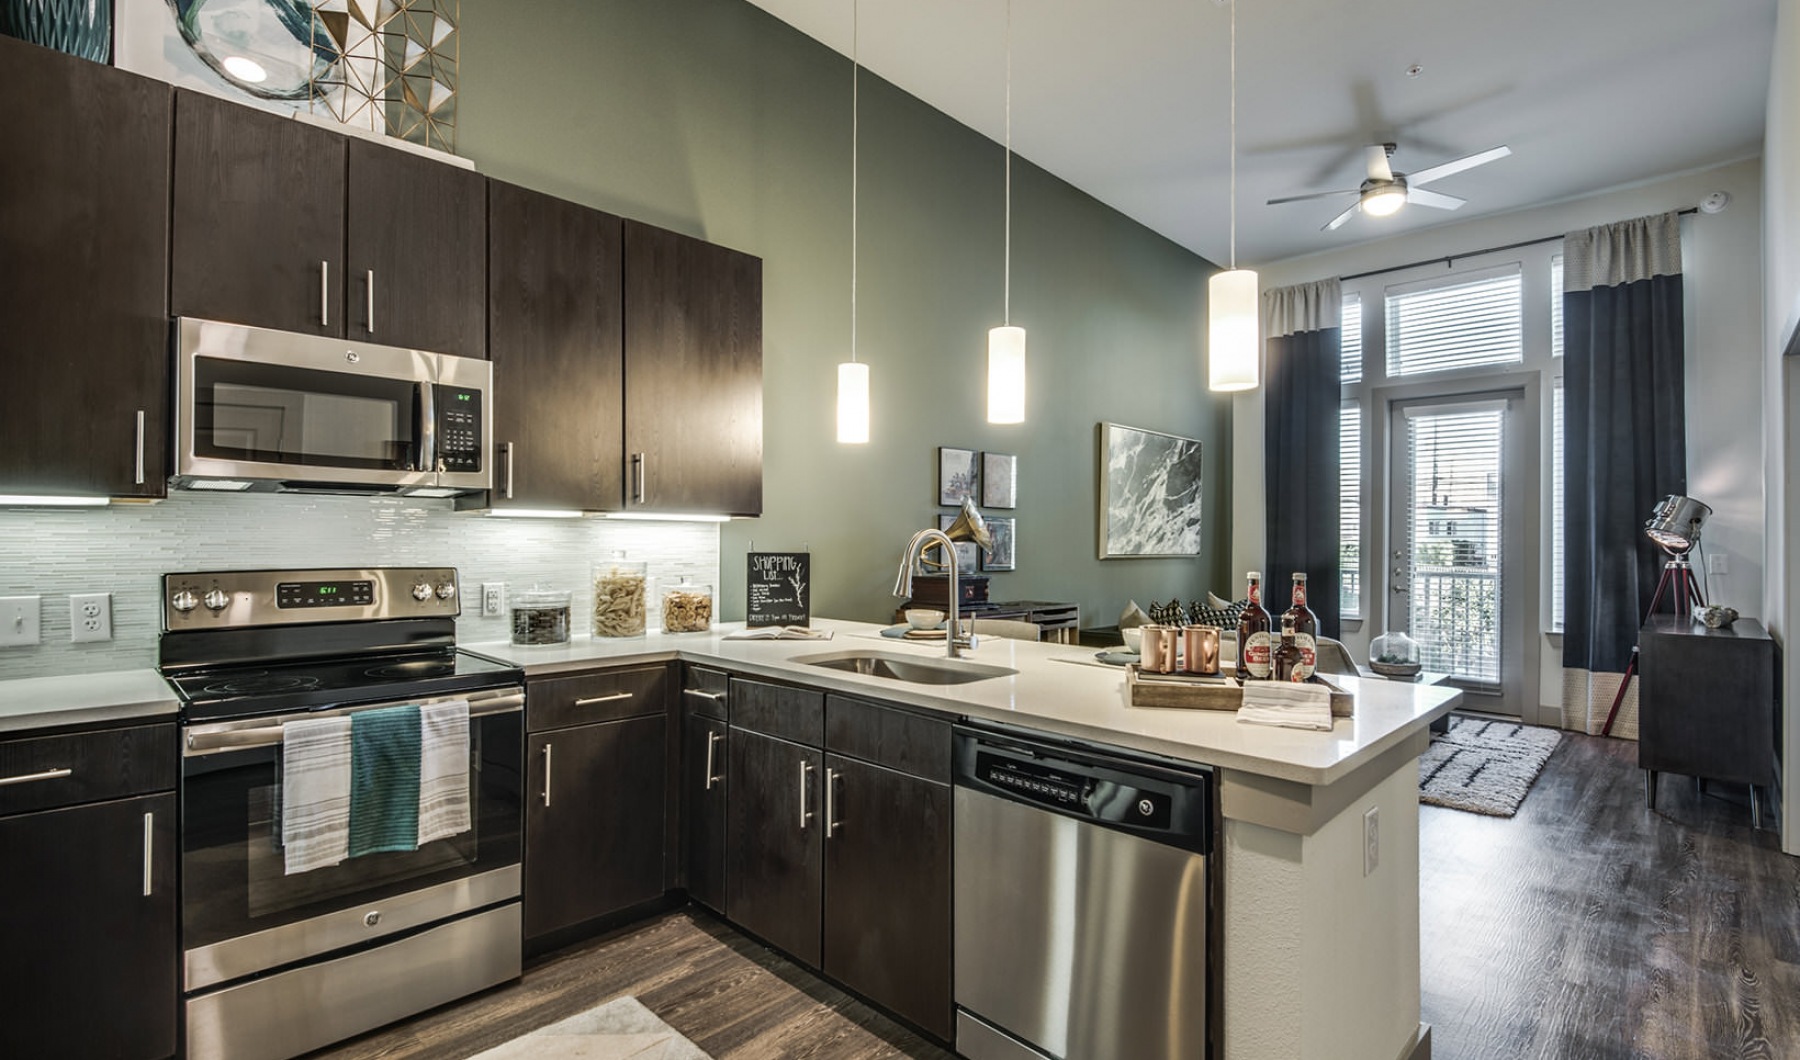 Model kitchen with stainless appliances and pendant lighting